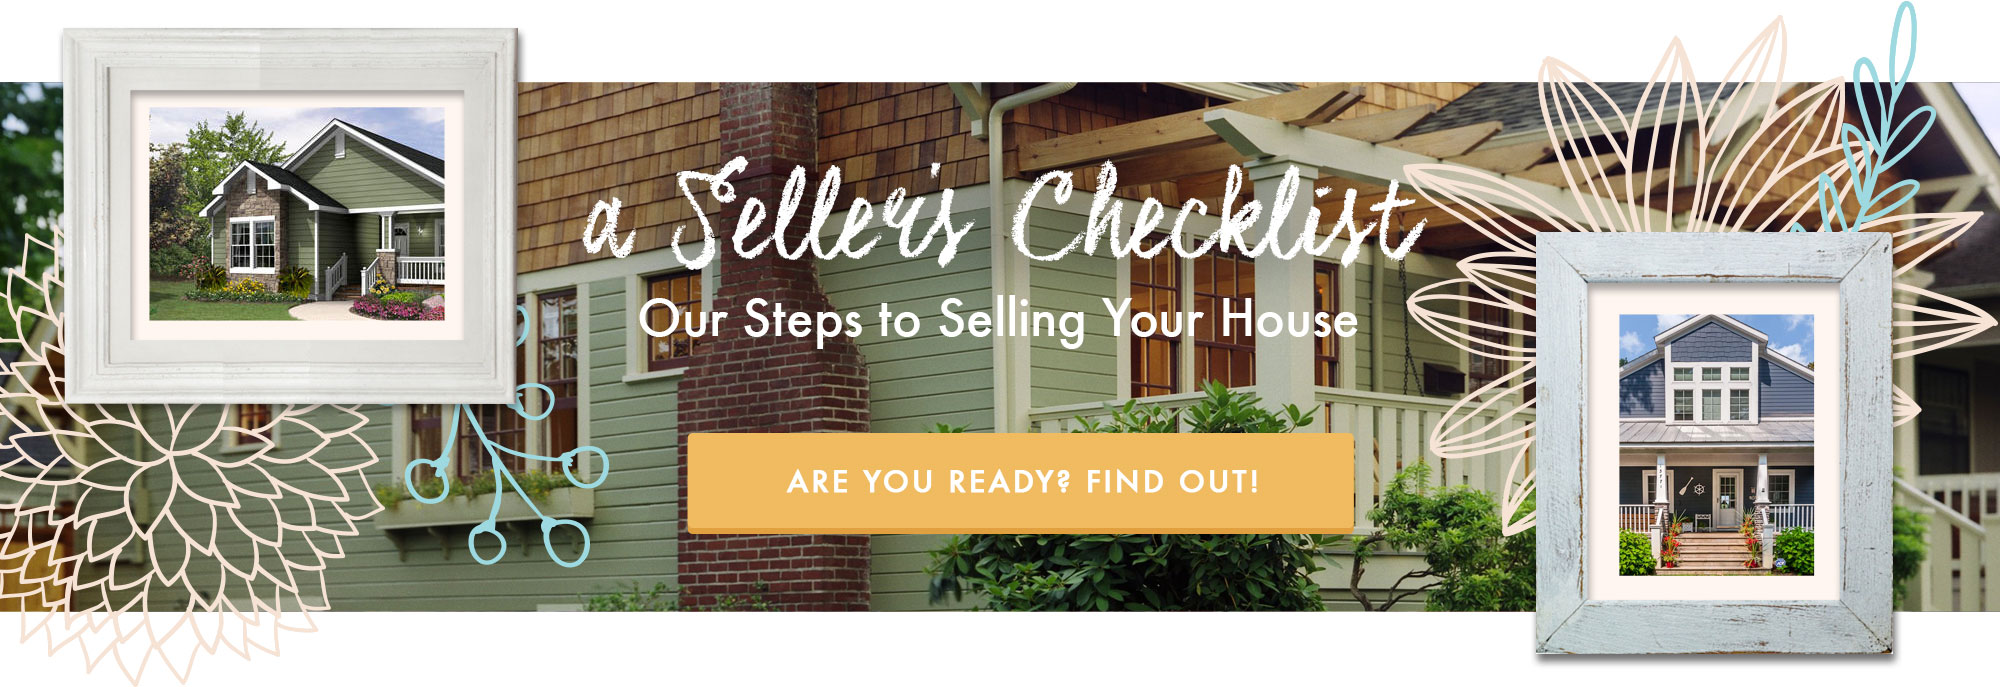 a Seller's Guide - Our Steps to Selling Your House